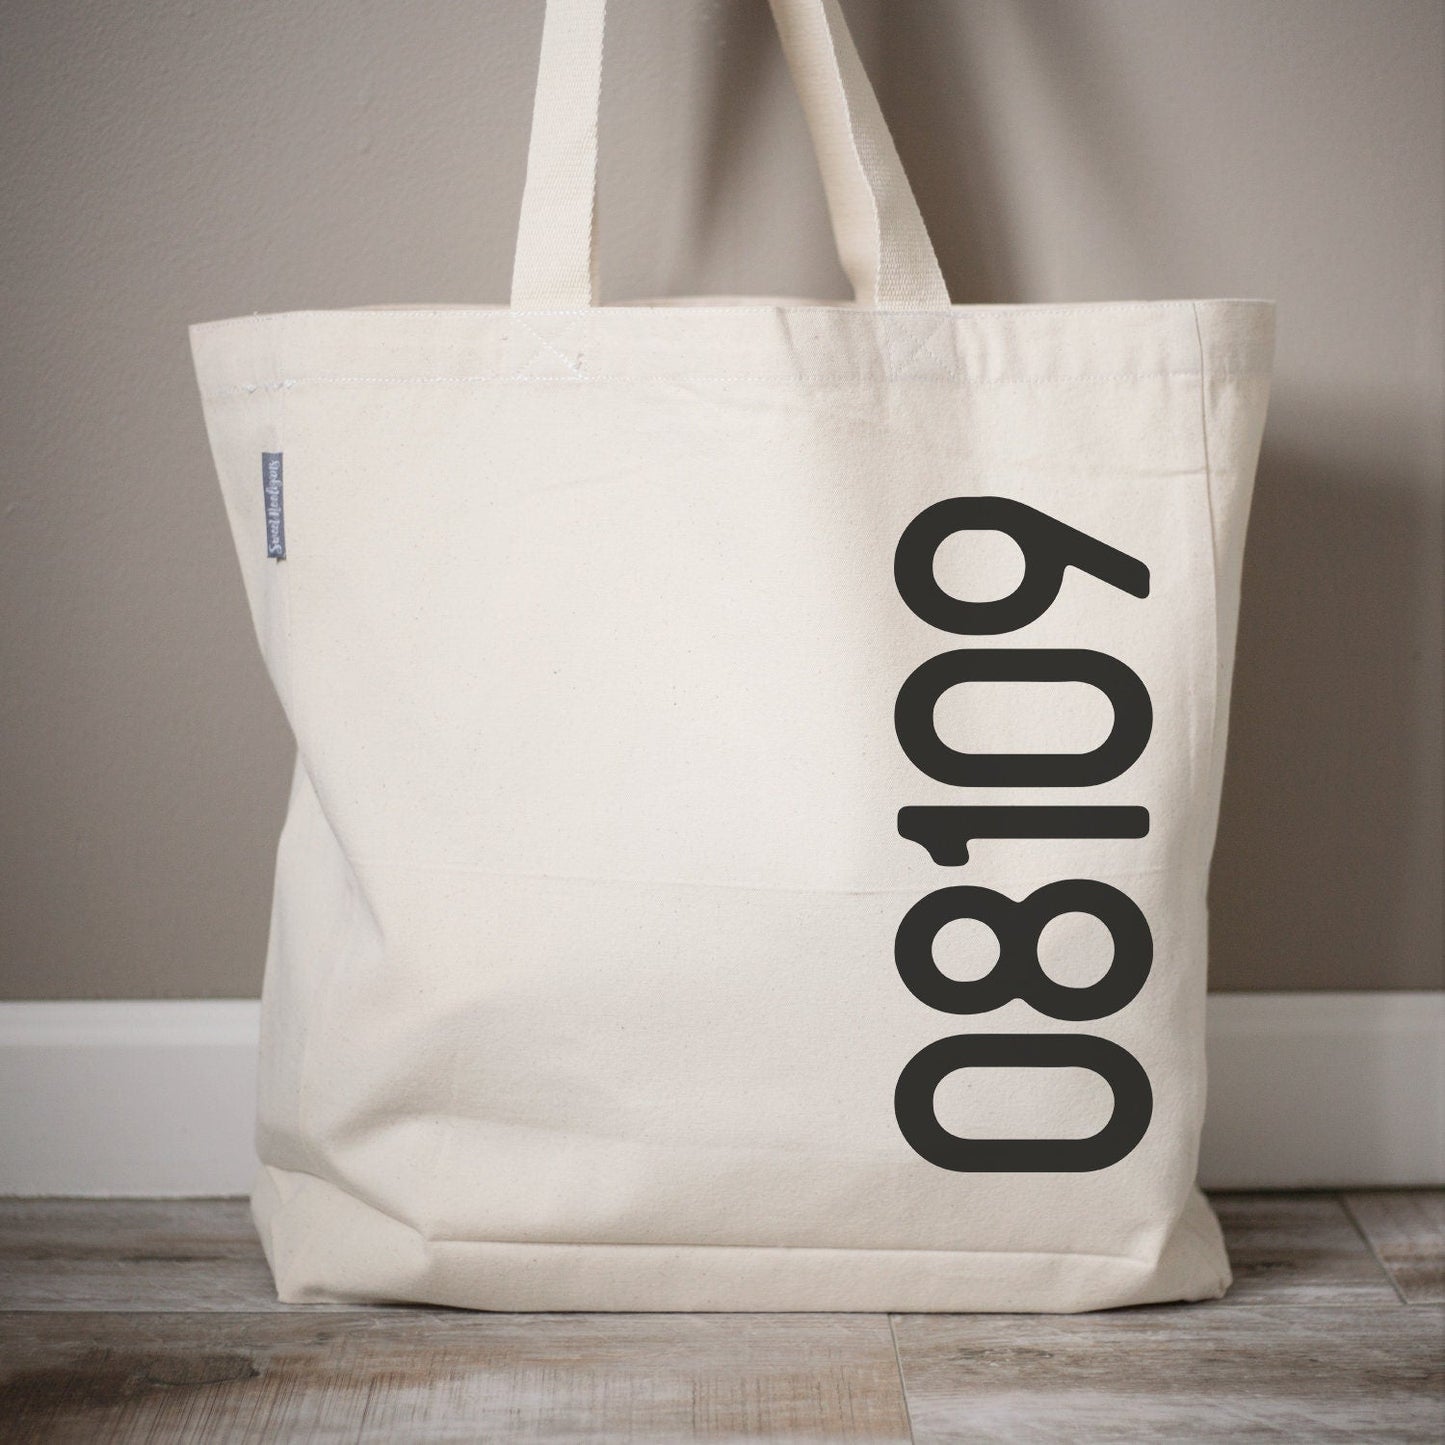 Personalized Zip code Tote Bags, Party Tote Bags